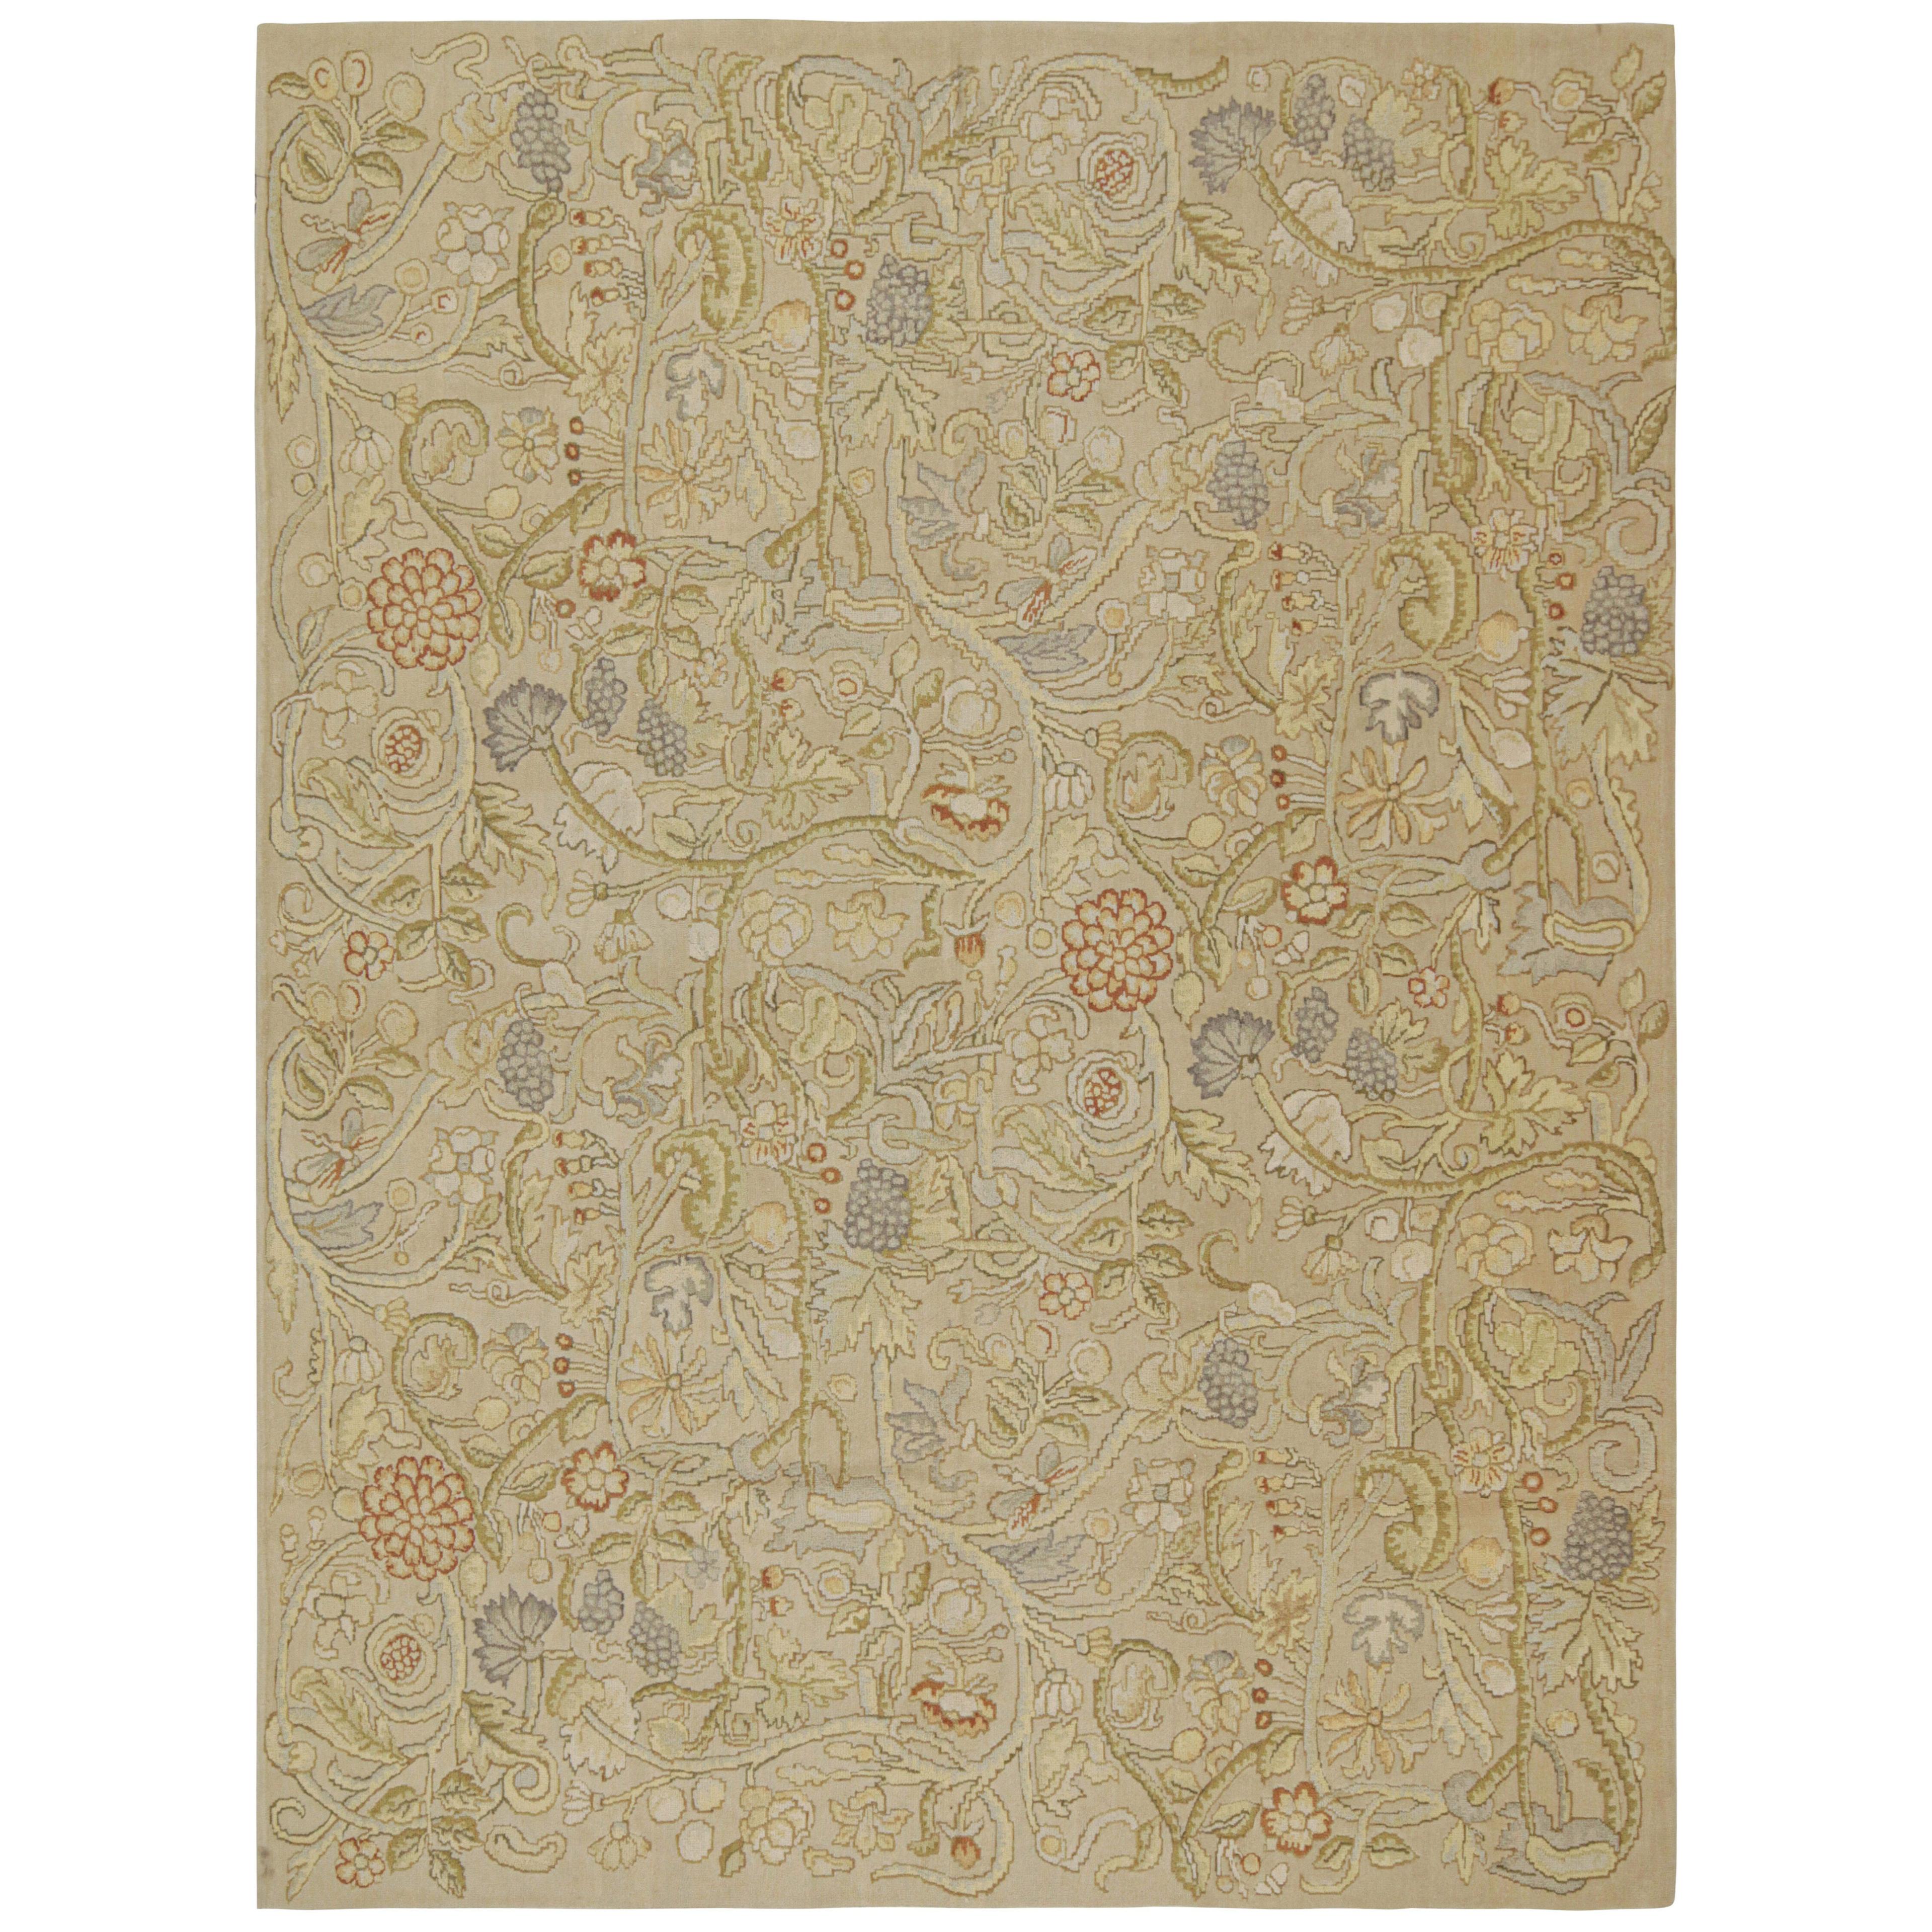 Rug & Kilim’s English Tudor Style Flatweave in Beige with Floral Patterns